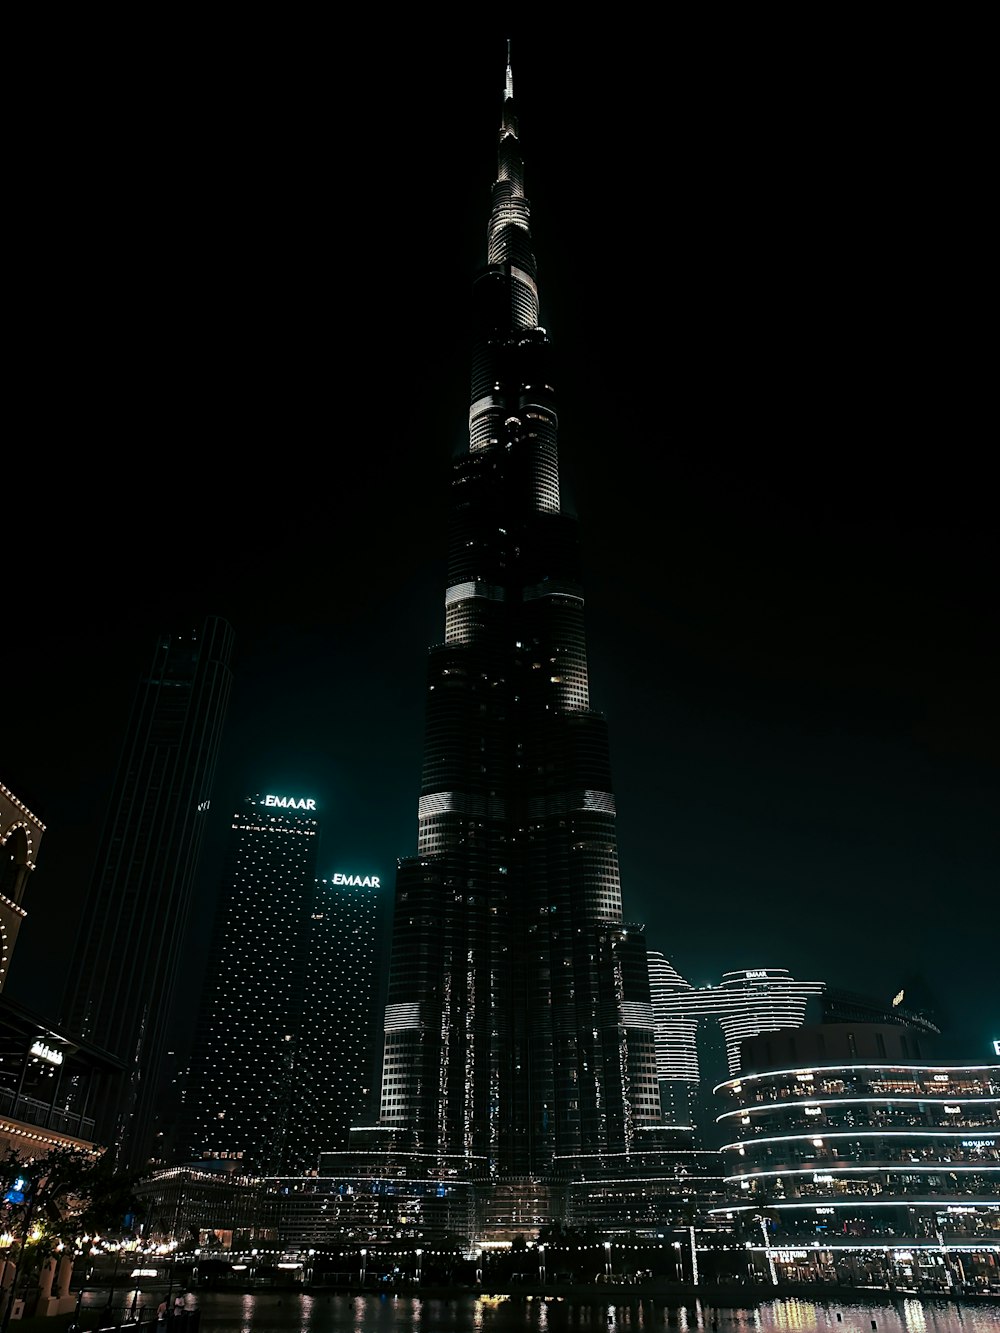 a night view of a very tall building in the middle of a city